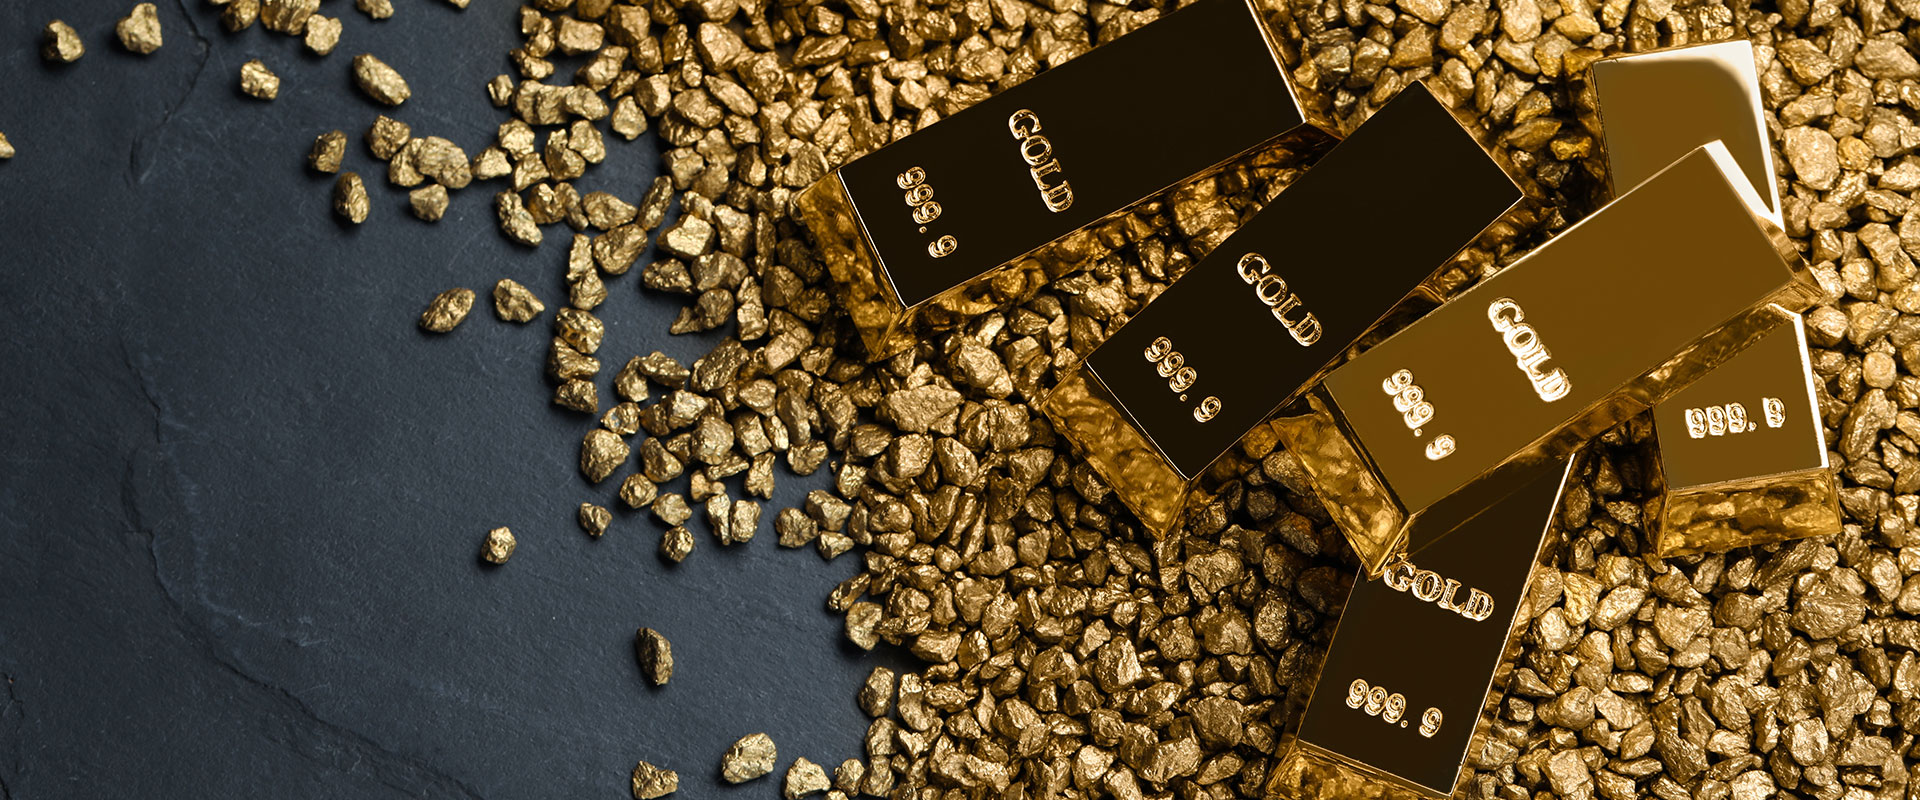 gold bars and gold nuggets on black background